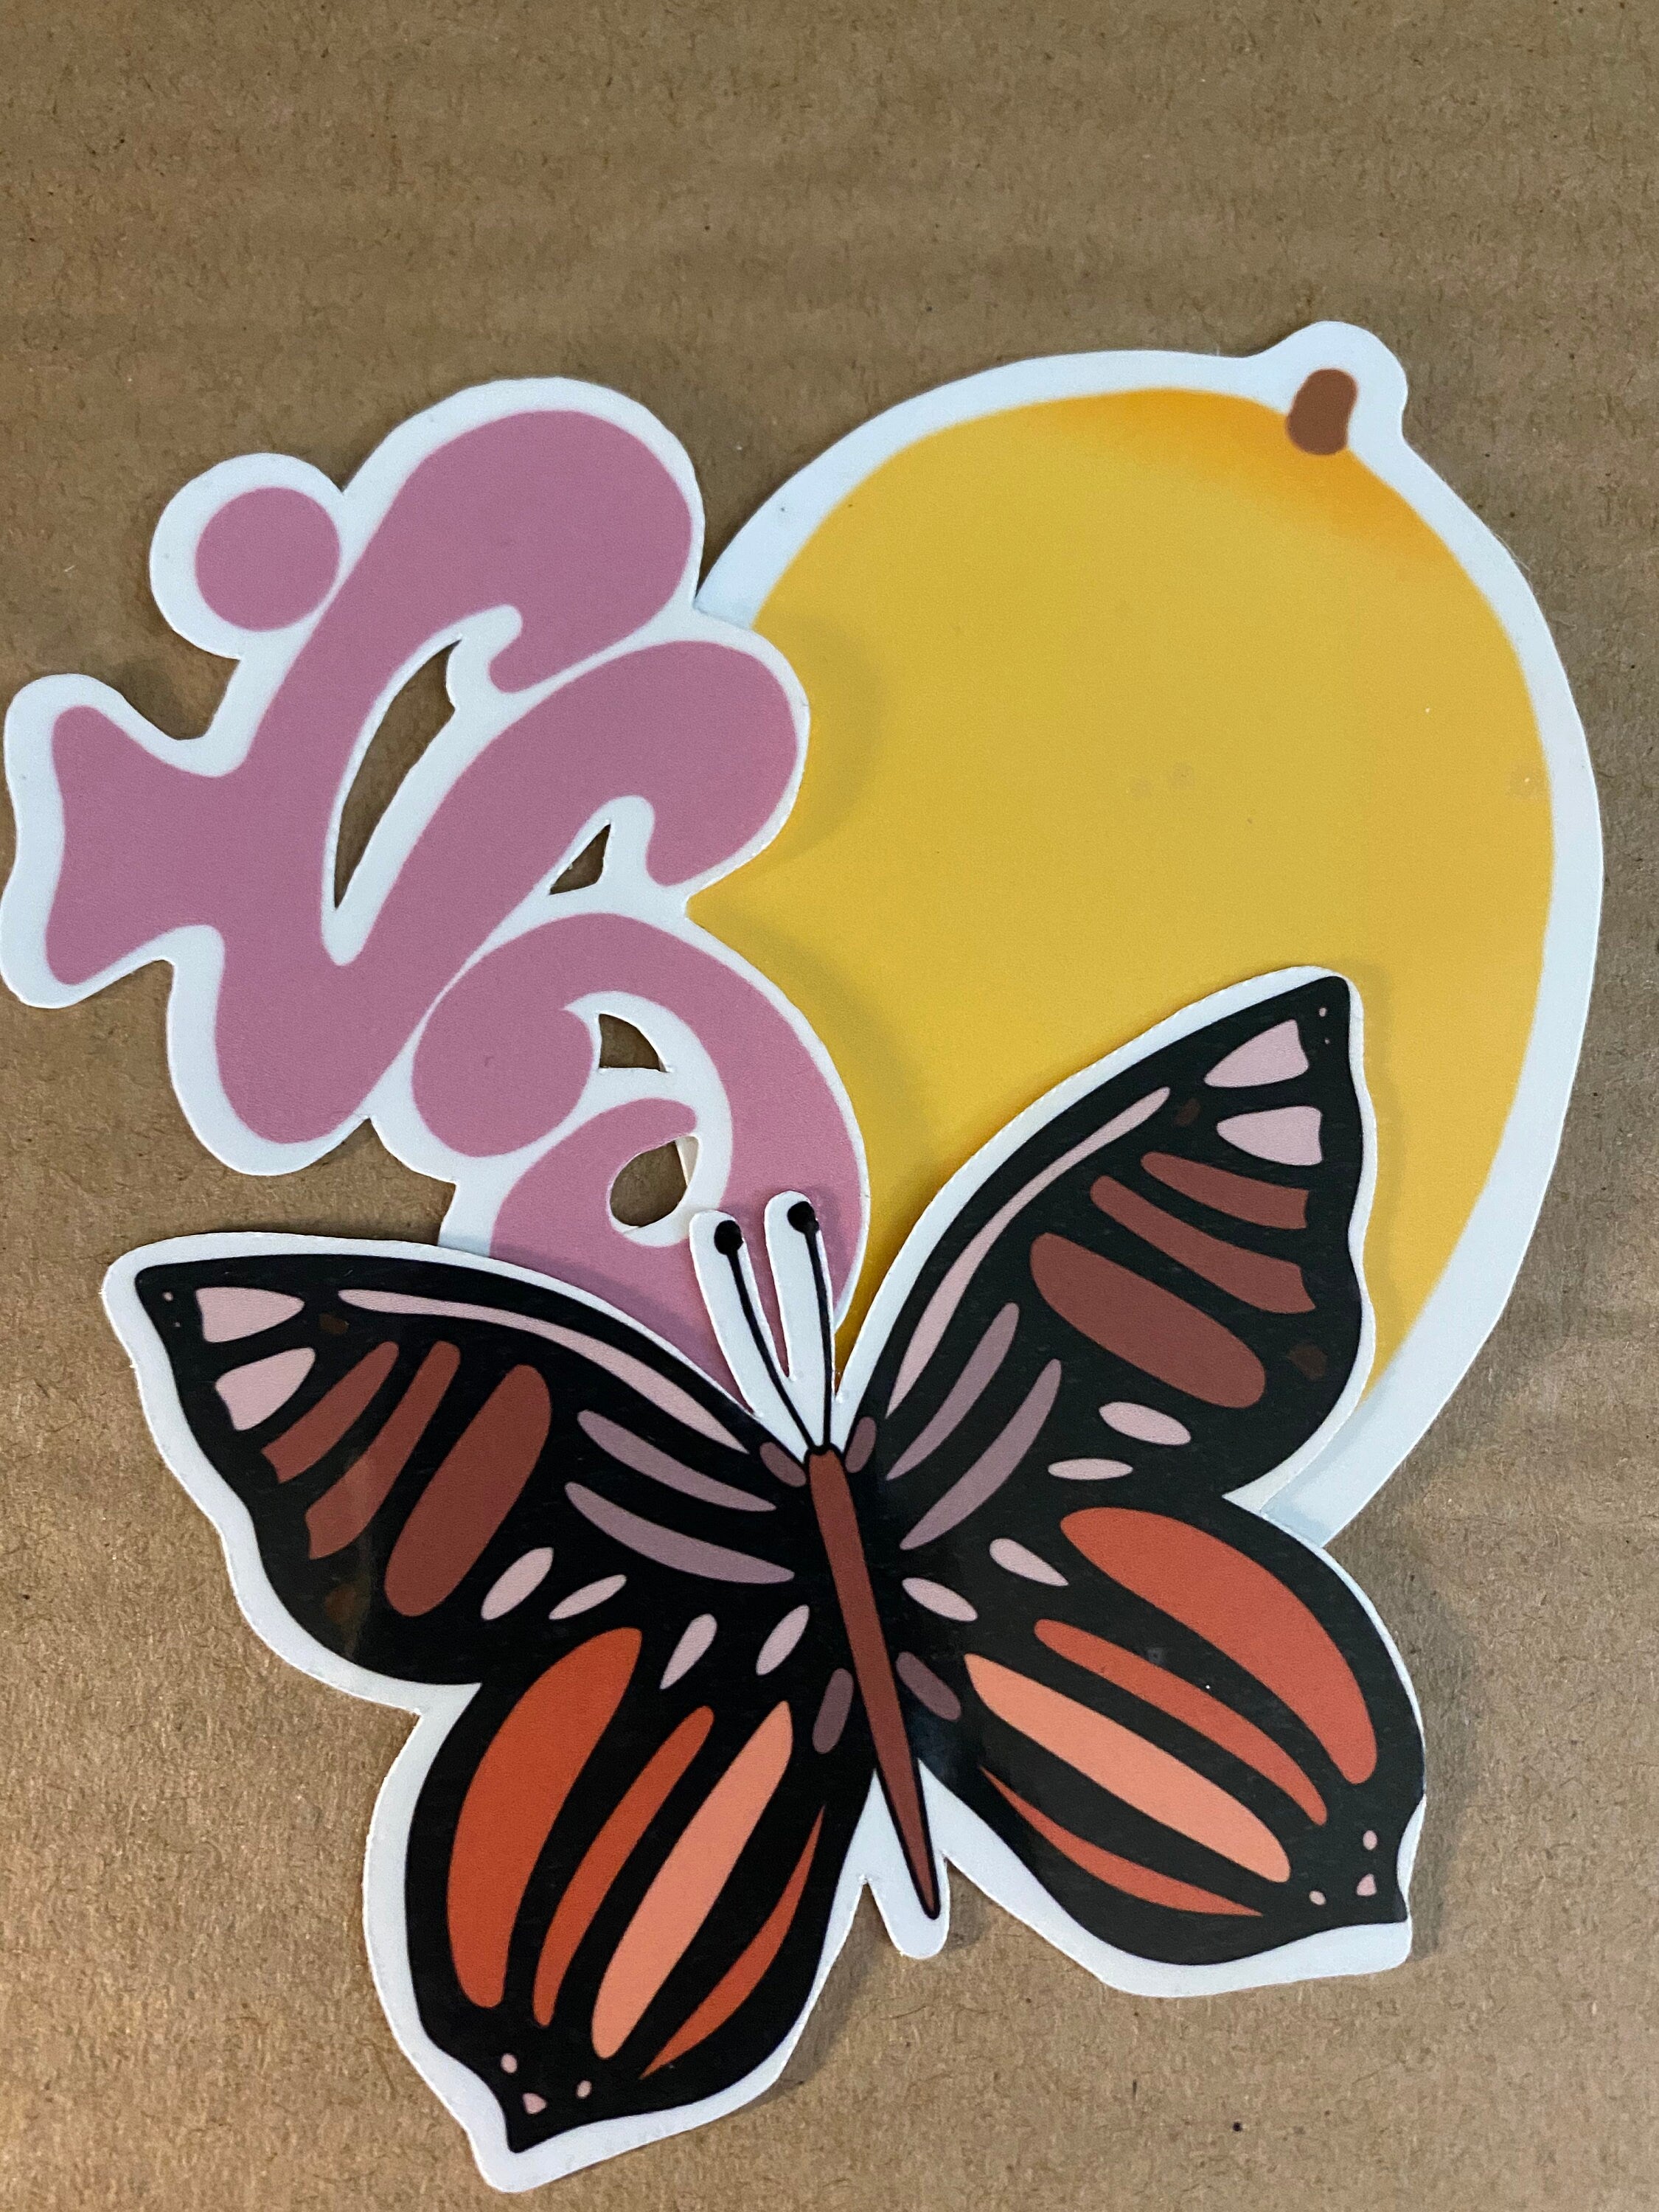 Mie Makes Mystery Oppsie Sticker Pack, Discounted Stickers, Sticker Grab Bag, Scrapbook Stickers, Oops Stickers, Die Cut Stickers, Filipina Stickers